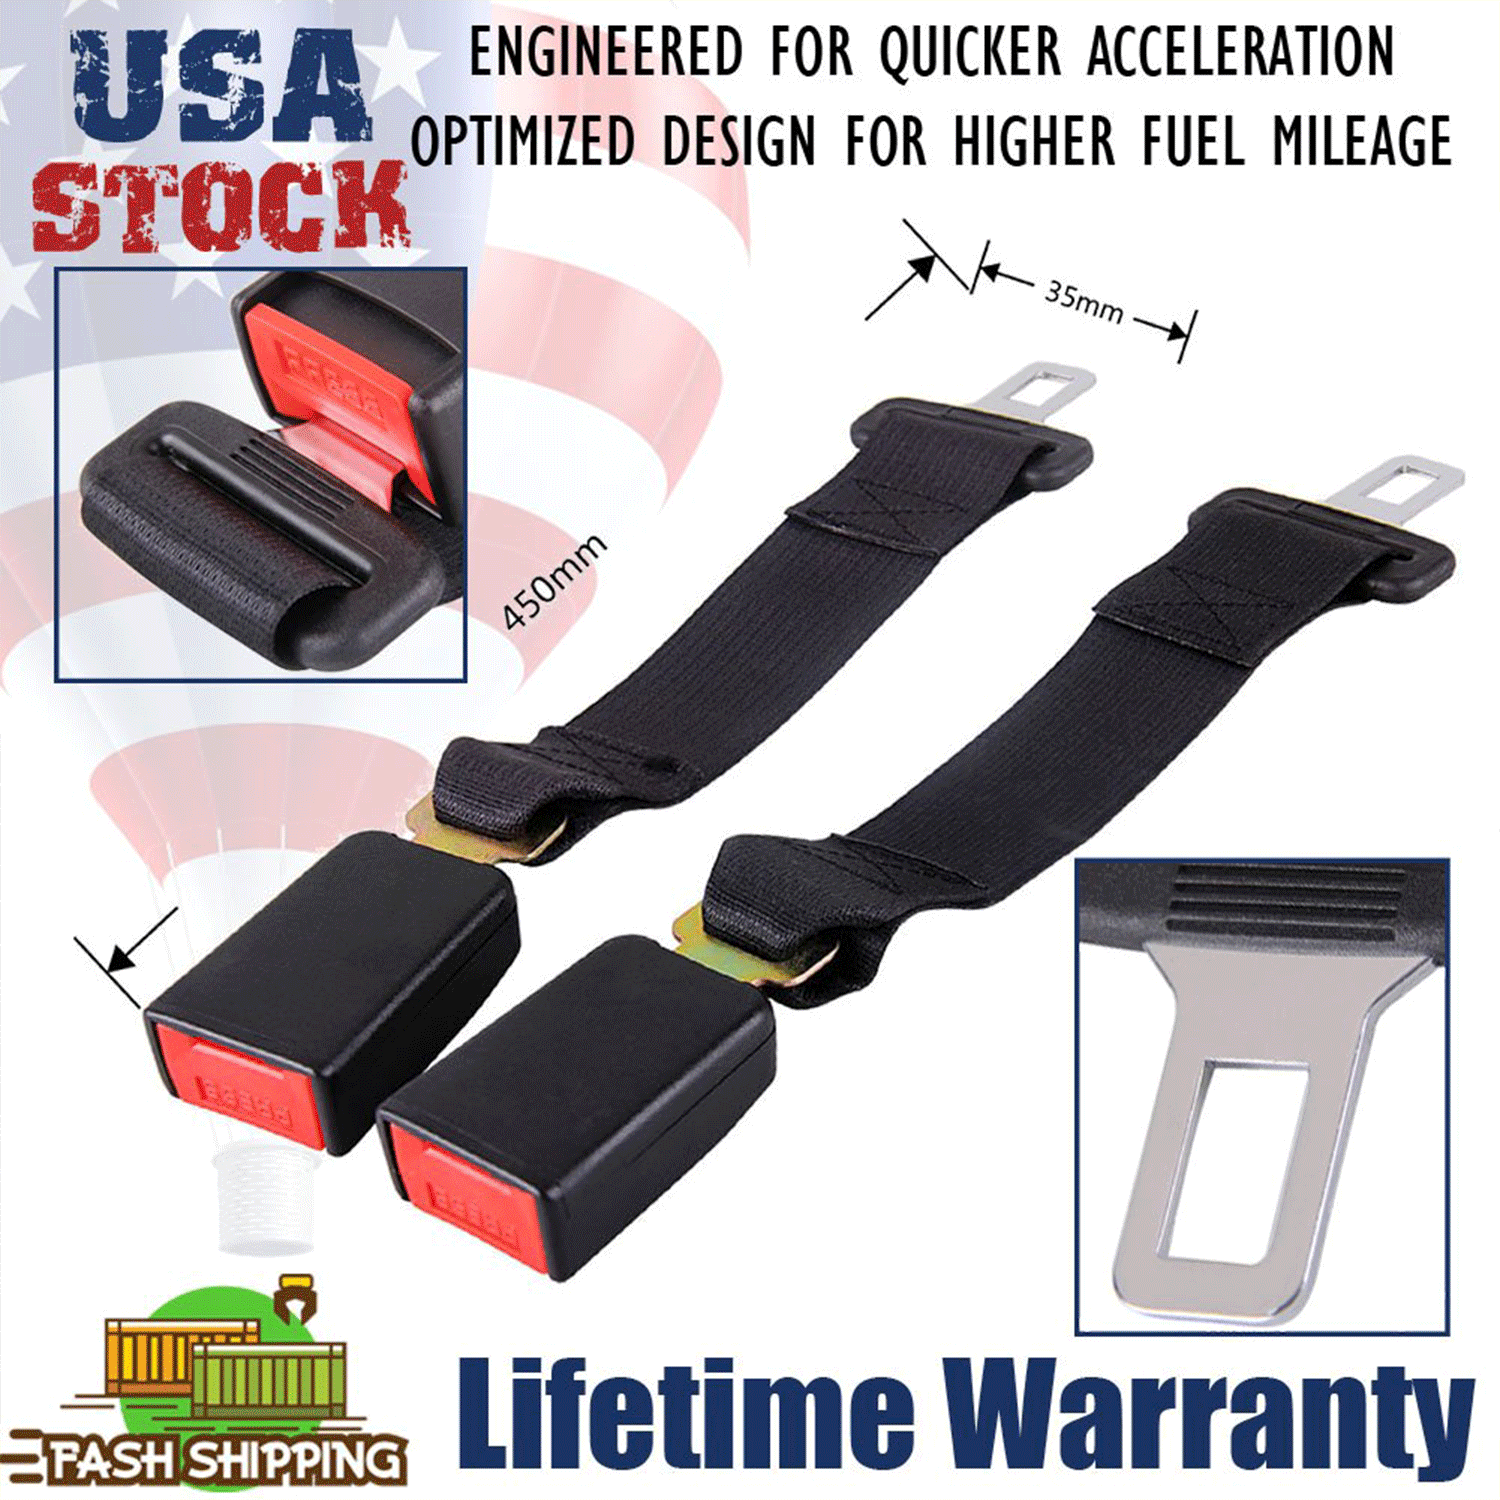 Rear Seats Rigid 12" Seat Belt Extender for 2015 Chrysler Town & Country 